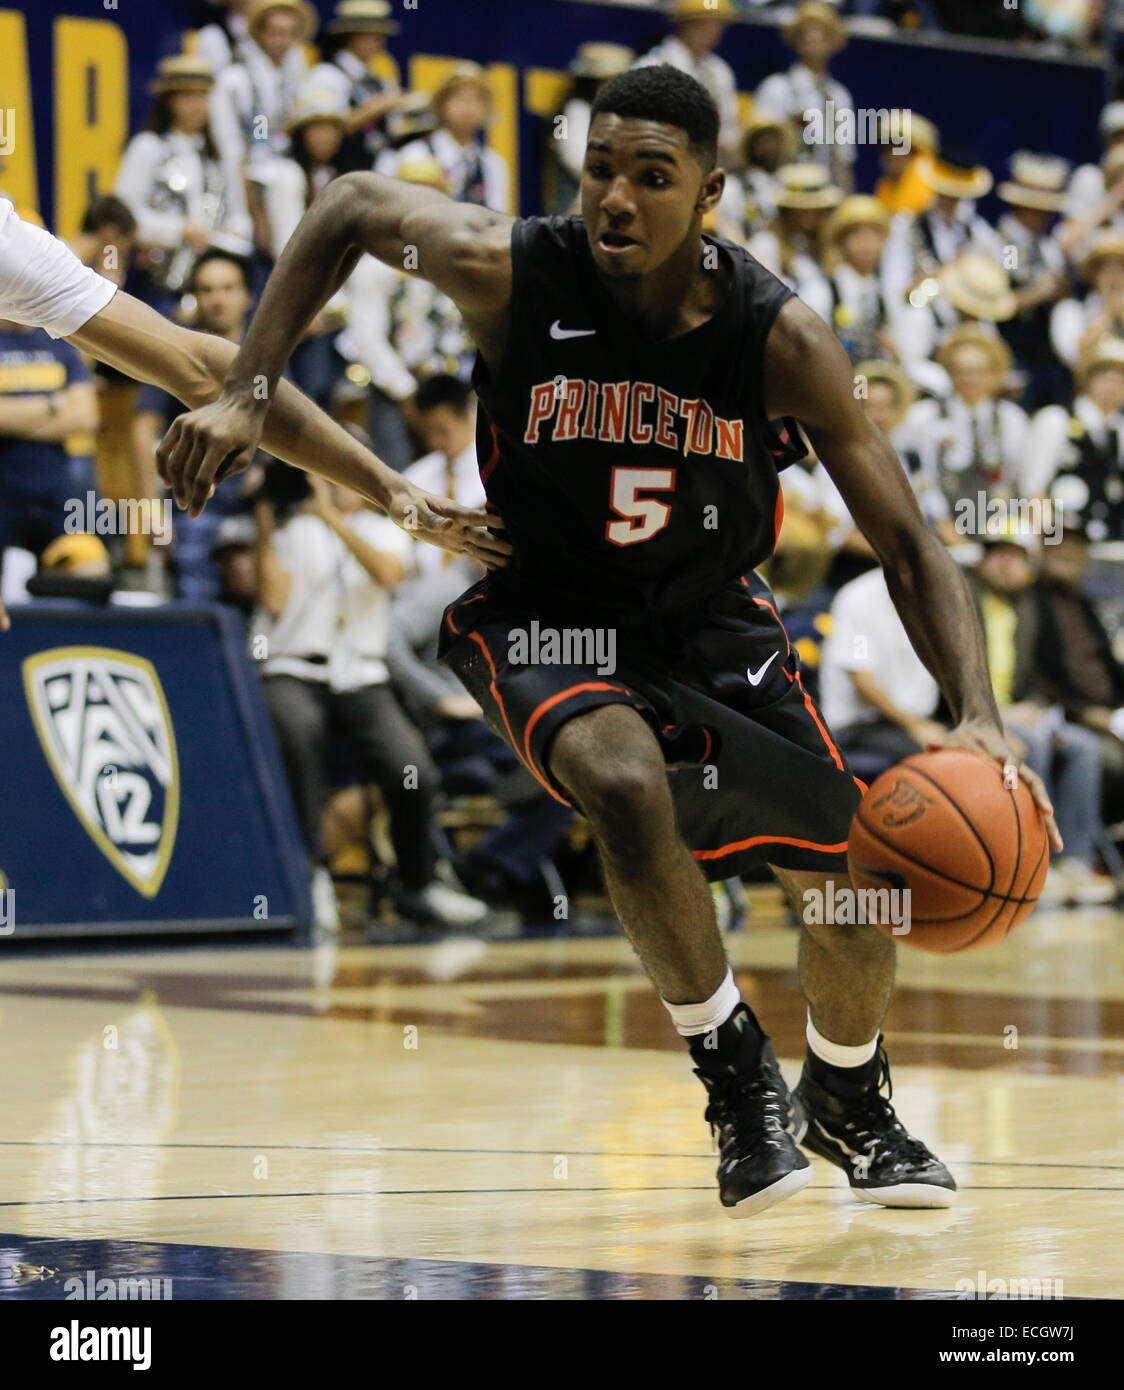 Berkeley USA CA. 13th Dec, 2014. Princeton G # 5 Amir Bell at the top of the key drive in the paint and score during NCAA Men's Basketball game between Princeton Tigers and California Golden Bears 57-67 lost at Hass Pavilion Berkeley Calif. © csm/Alamy Live News Stock Photo